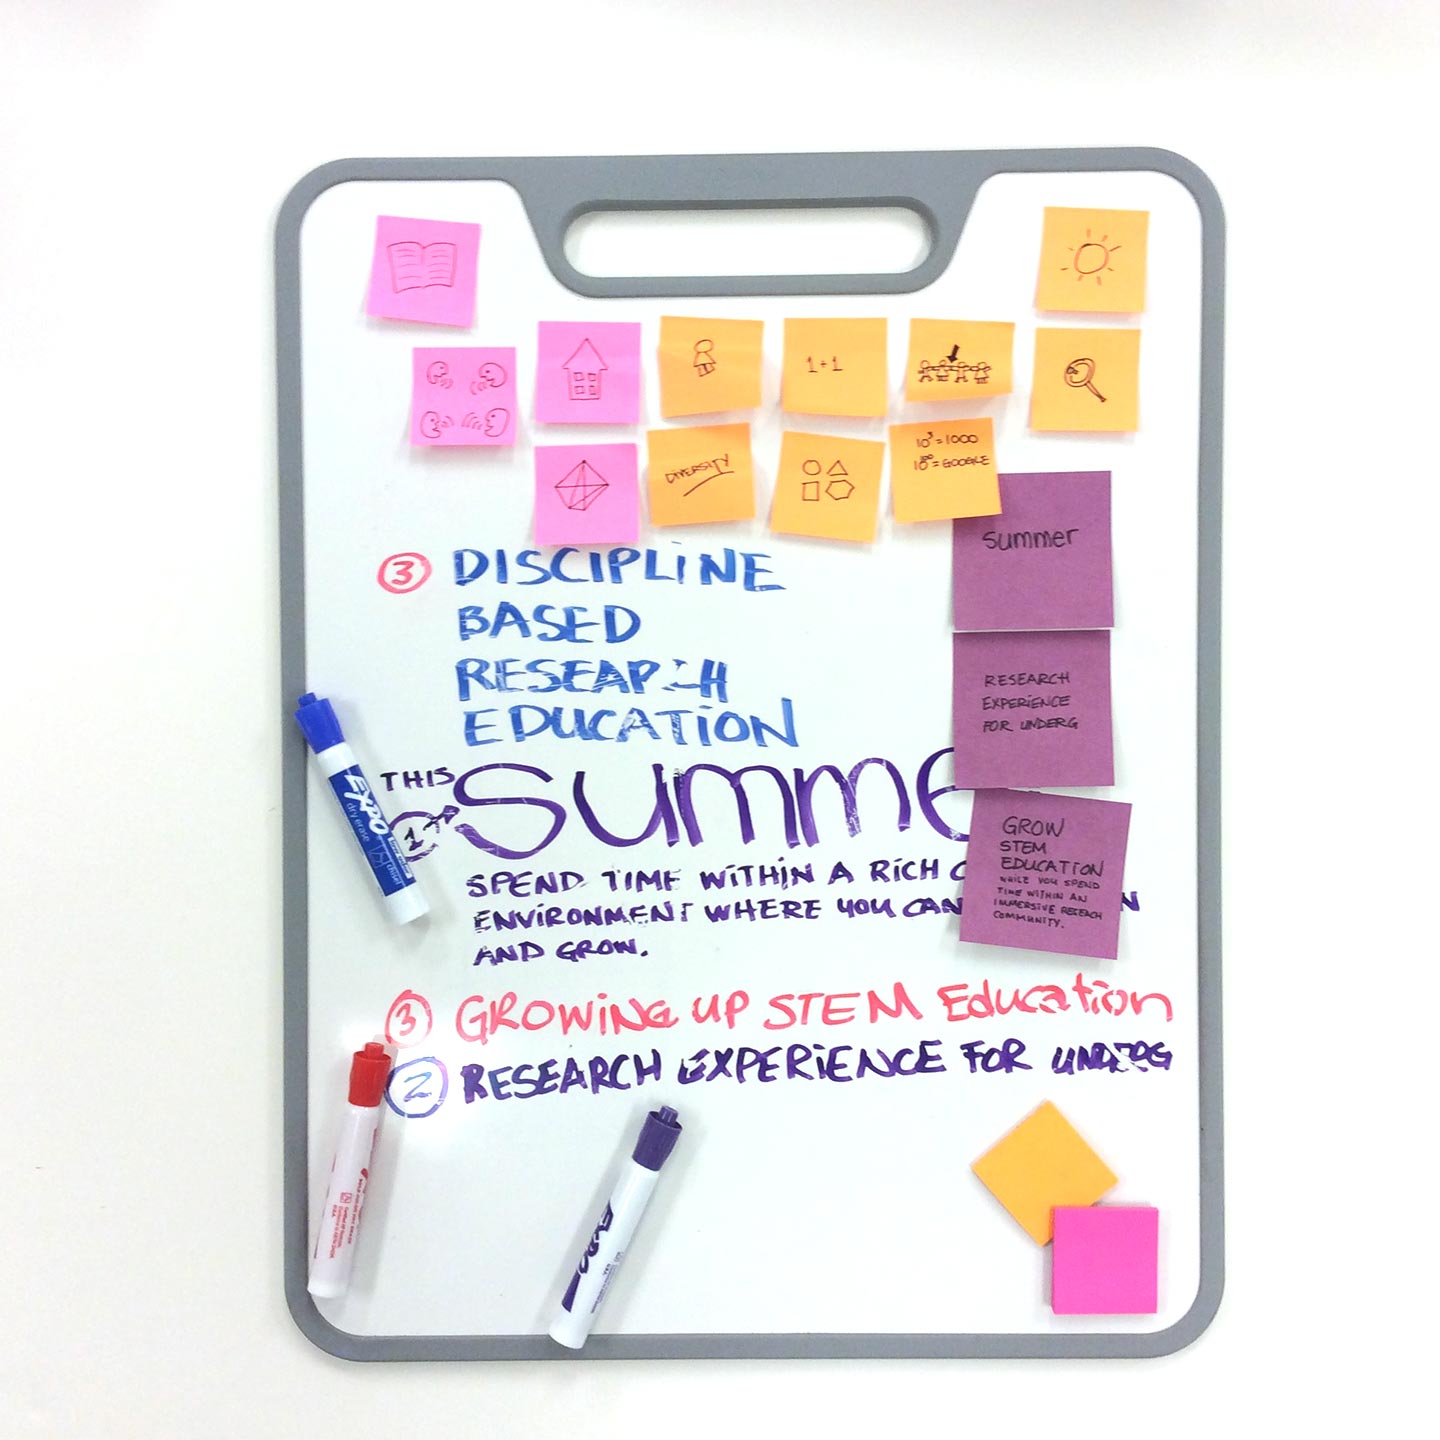 Whiteboard with gray border and handle covered in colorful post-it notes and writing